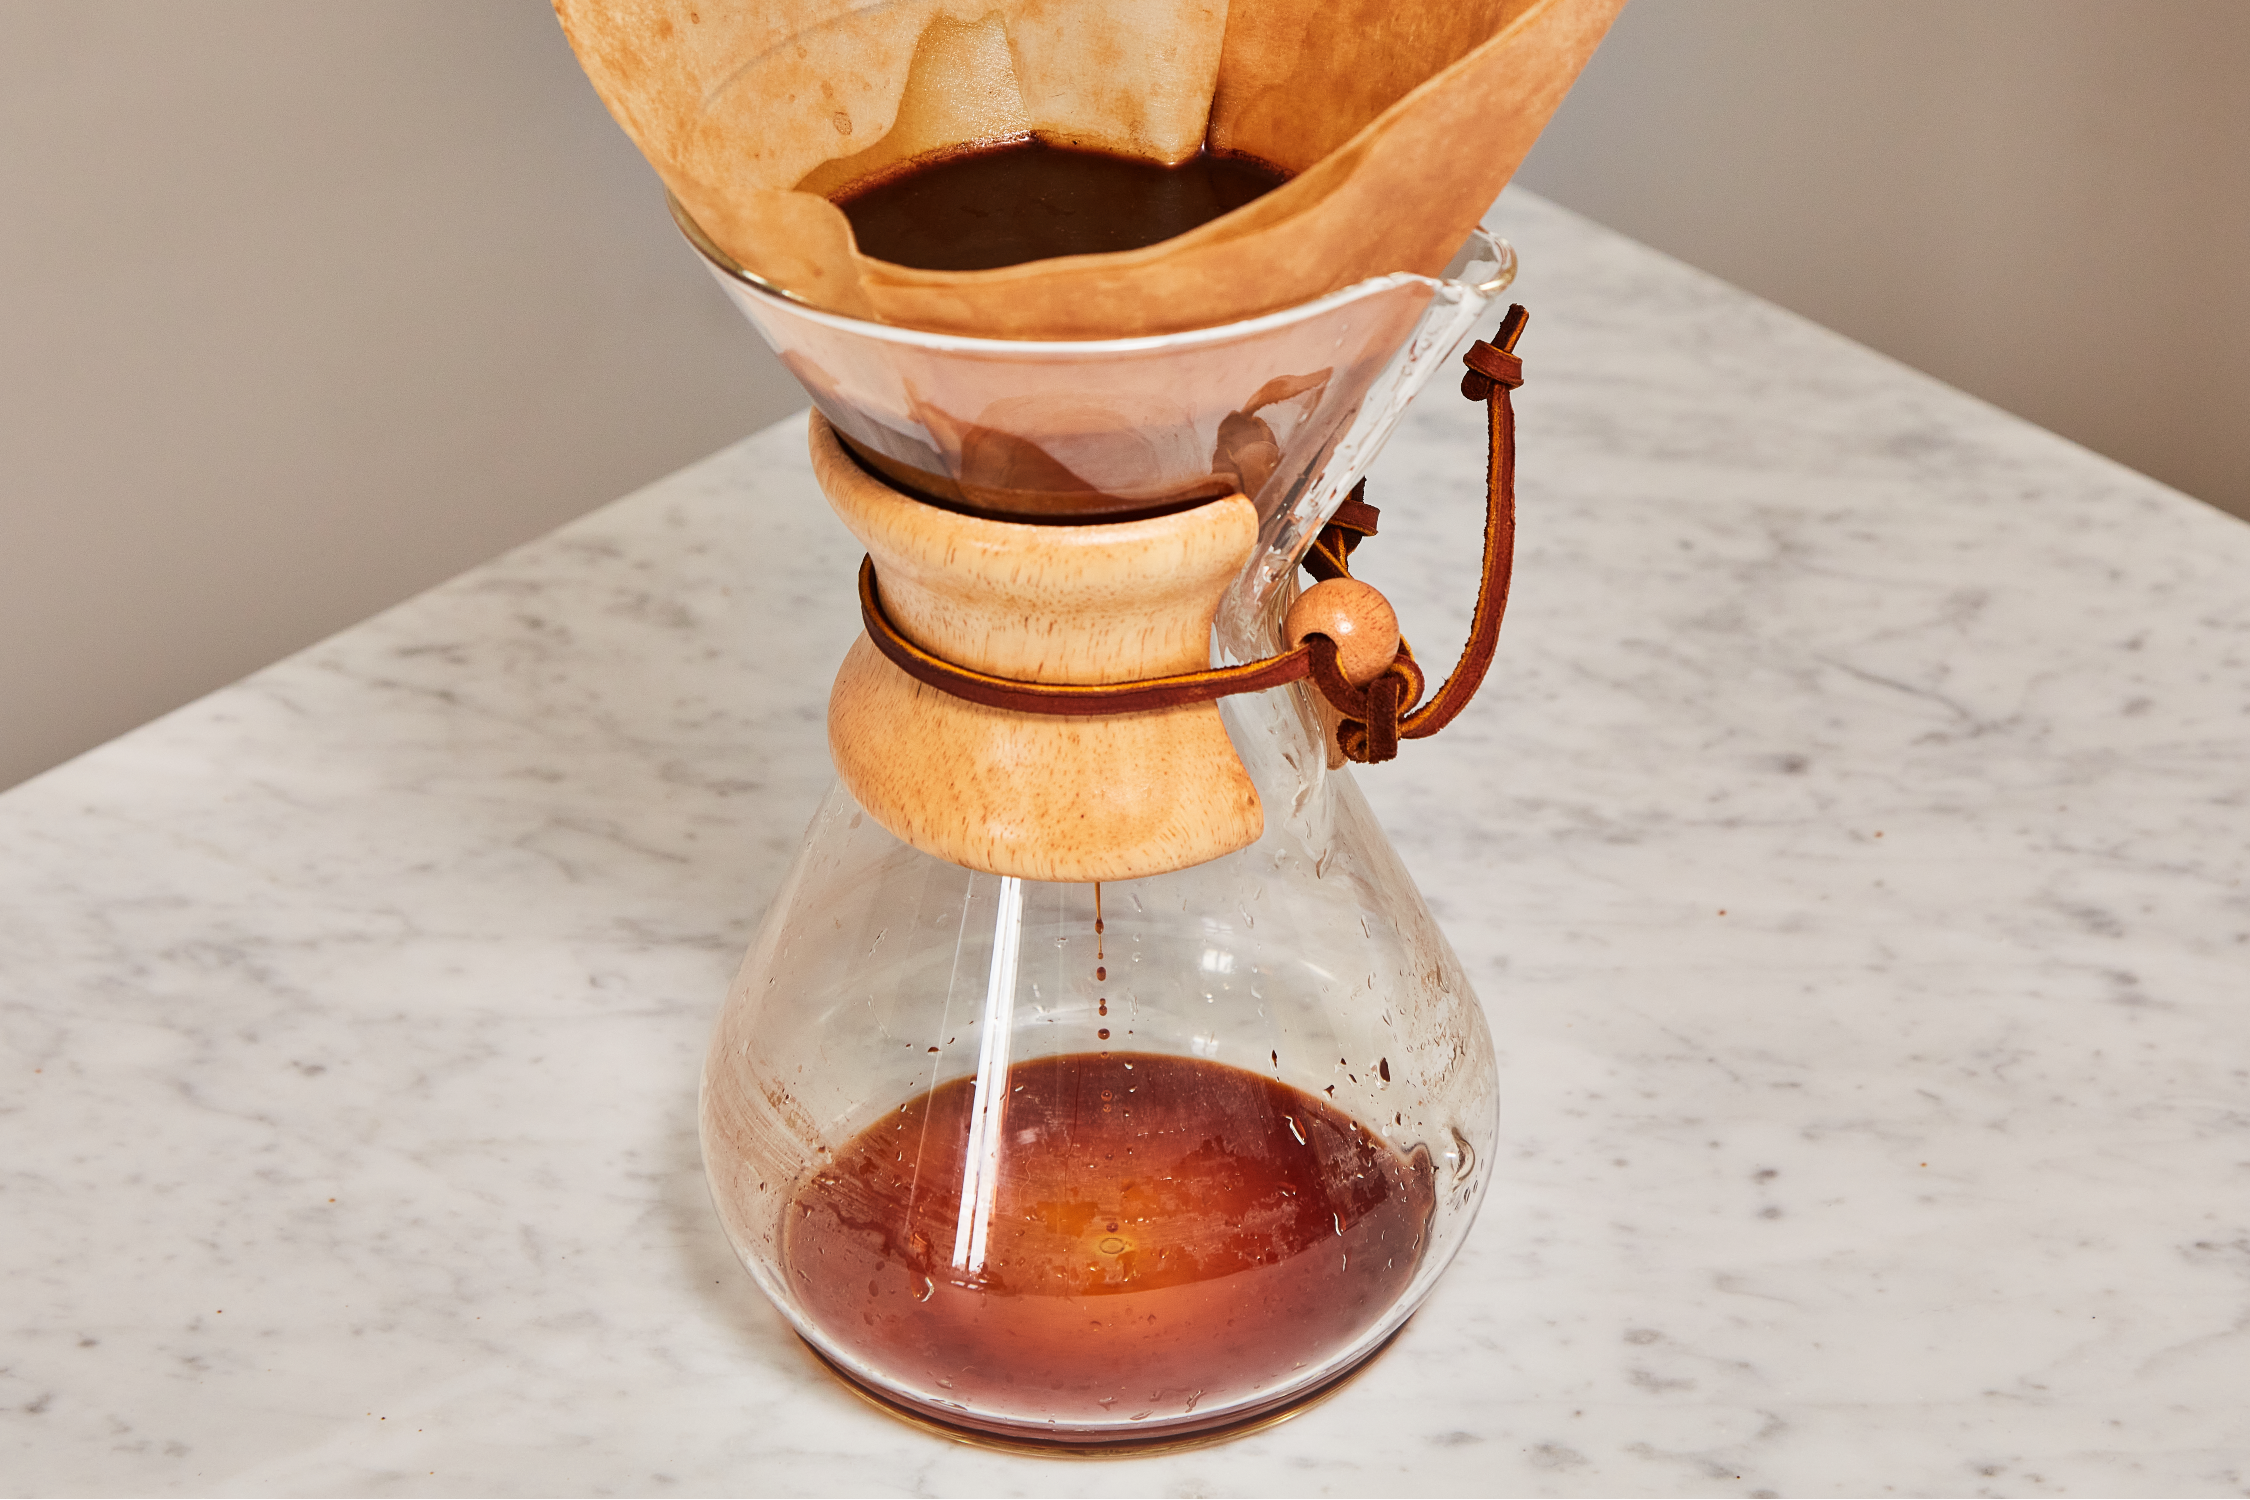 Cold Brew Filter Coffee maker